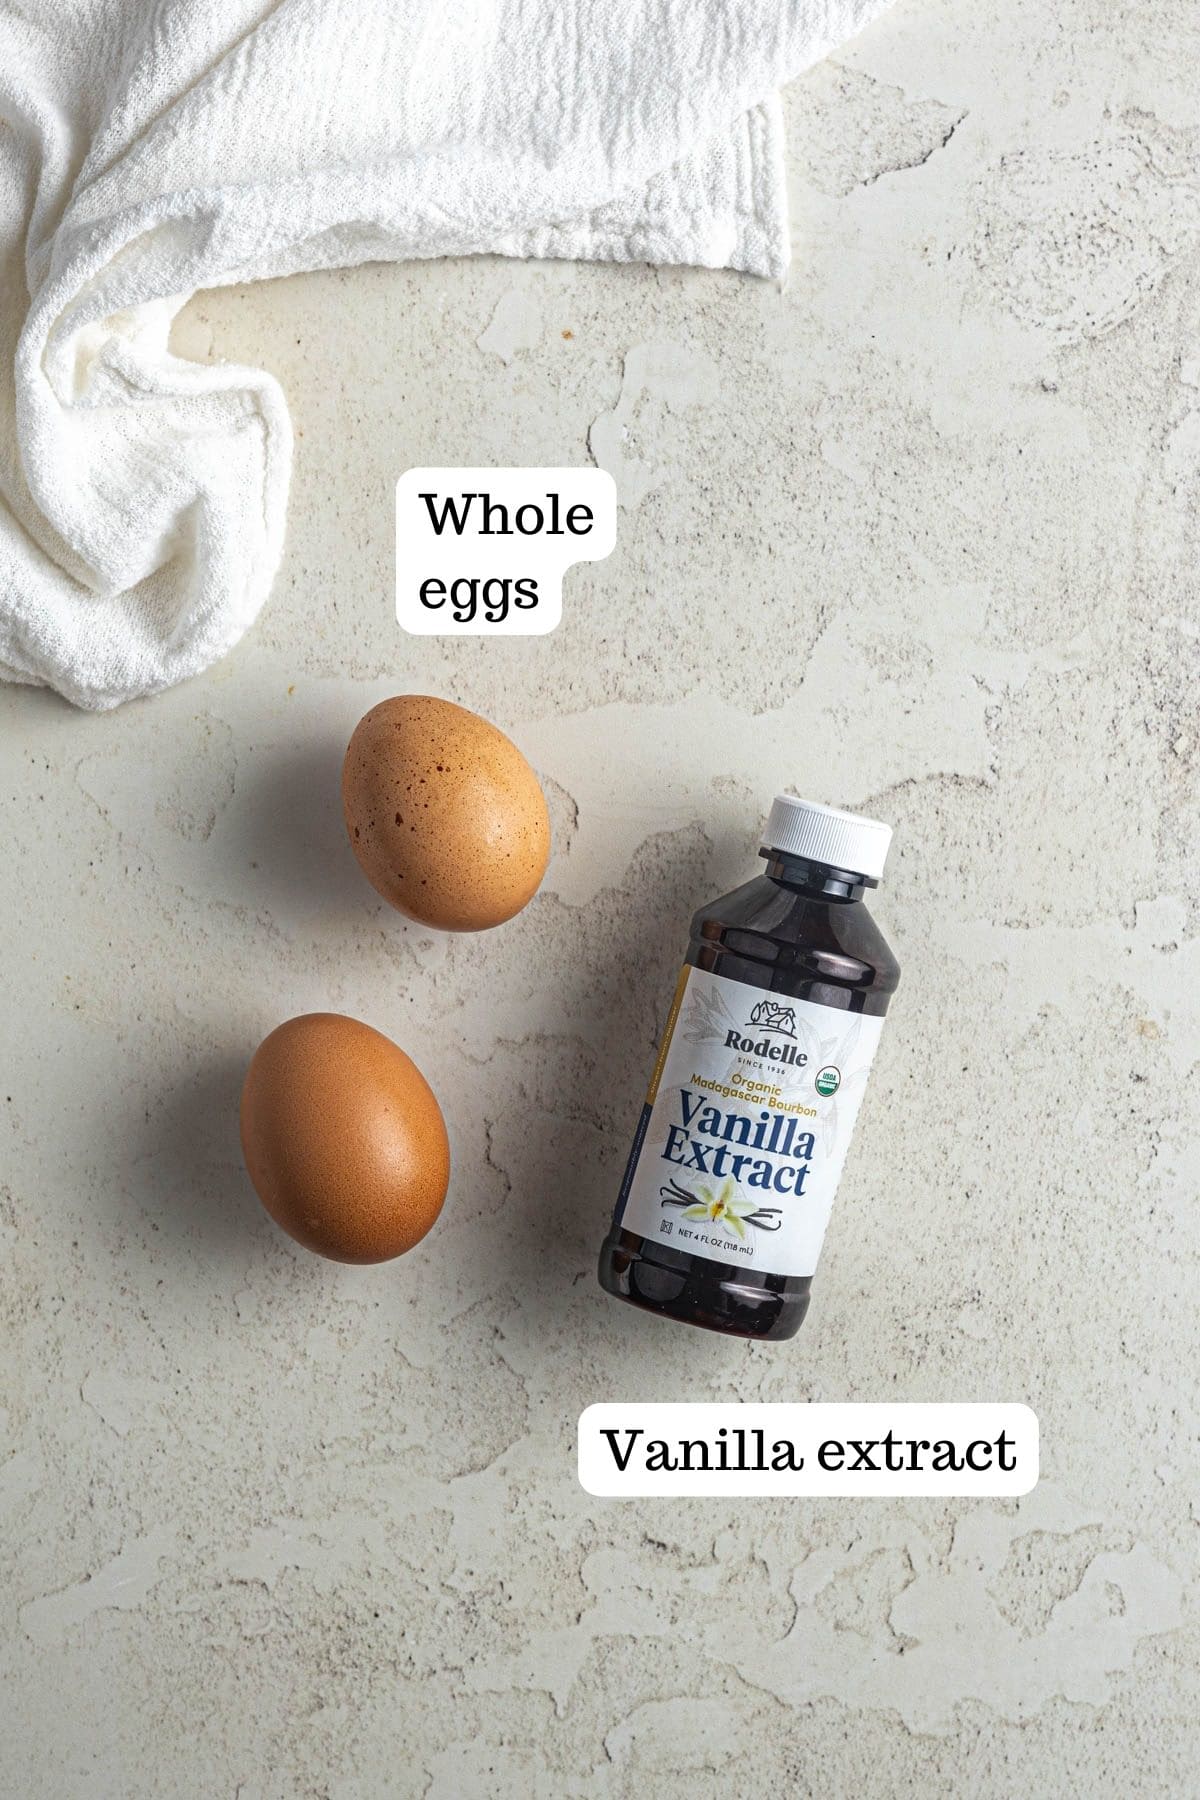 Image showing whole eggs and vanilla extract for White Chocolate Raspberry Blondies.